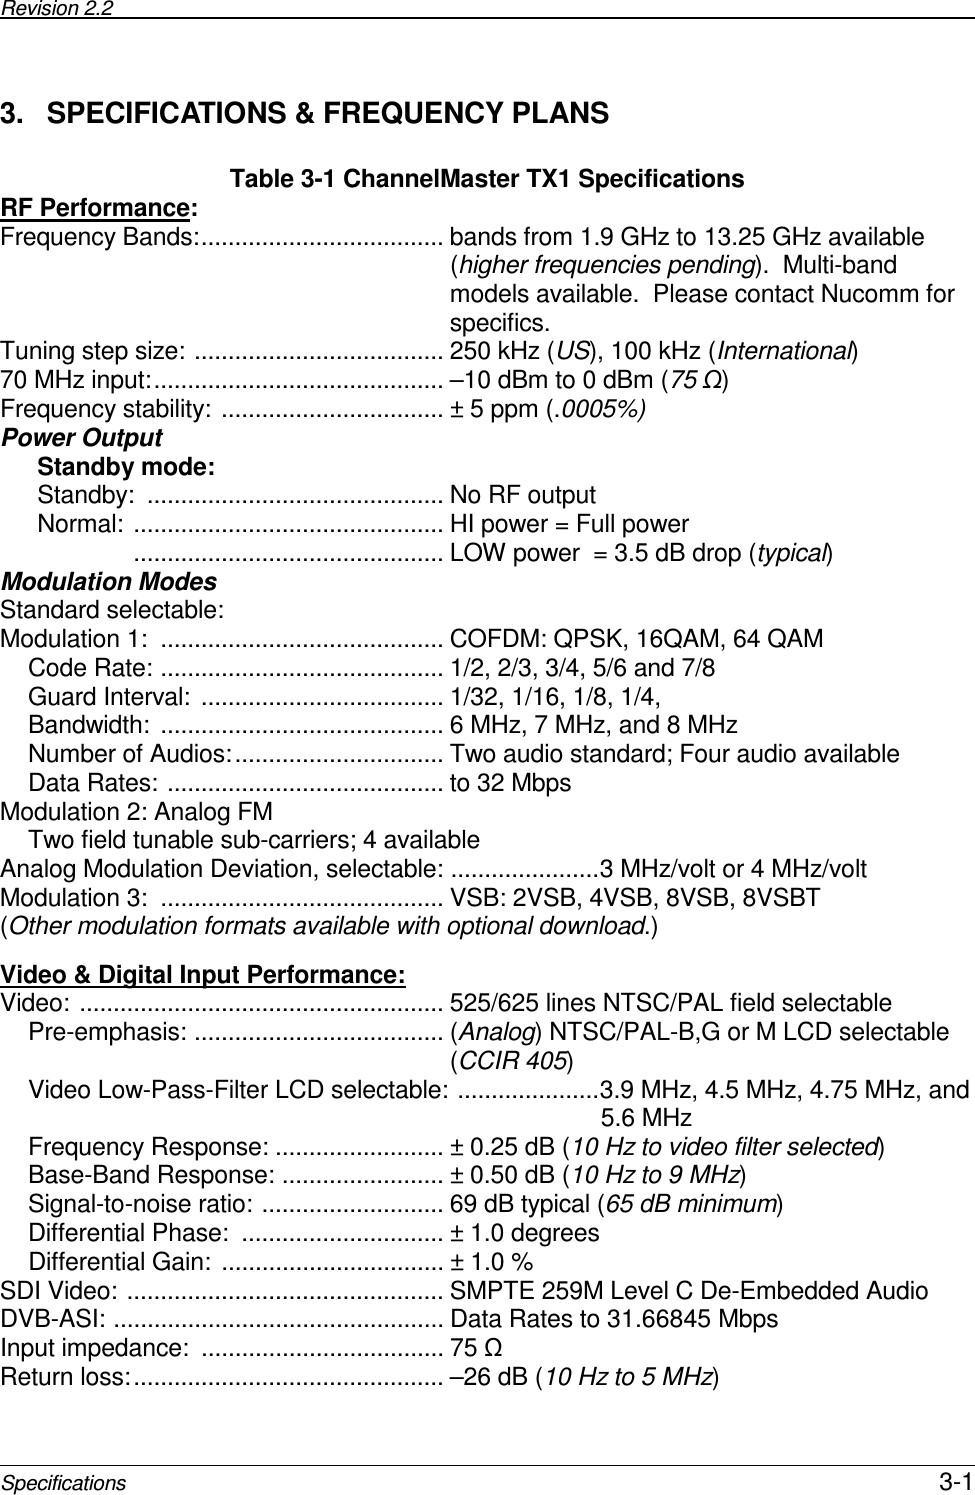 Revision 2.2       Specifications 3-1 3.  SPECIFICATIONS &amp; FREQUENCY PLANS Table 3-1 ChannelMaster TX1 Specifications RF Performance: Frequency Bands:.................................... bands from 1.9 GHz to 13.25 GHz available (higher frequencies pending).  Multi-band models available.  Please contact Nucomm for specifics. Tuning step size: ..................................... 250 kHz (US), 100 kHz (International) 70 MHz input:........................................... –10 dBm to 0 dBm (75 ) Frequency stability: ................................. ± 5 ppm (.0005%) Power Output Standby mode: Standby:  ............................................ No RF output Normal: .............................................. HI power = Full power               .............................................. LOW power  = 3.5 dB drop (typical) Modulation Modes Standard selectable: Modulation 1:  .......................................... COFDM: QPSK, 16QAM, 64 QAM Code Rate: .......................................... 1/2, 2/3, 3/4, 5/6 and 7/8 Guard Interval:  .................................... 1/32, 1/16, 1/8, 1/4,  Bandwidth: .......................................... 6 MHz, 7 MHz, and 8 MHz Number of Audios:............................... Two audio standard; Four audio available Data Rates: ......................................... to 32 Mbps Modulation 2: Analog FM Two field tunable sub-carriers; 4 available Analog Modulation Deviation, selectable: ......................3 MHz/volt or 4 MHz/volt Modulation 3:  .......................................... VSB: 2VSB, 4VSB, 8VSB, 8VSBT (Other modulation formats available with optional download.)  Video &amp; Digital Input Performance:  Video: ...................................................... 525/625 lines NTSC/PAL field selectable Pre-emphasis: ..................................... (Analog) NTSC/PAL-B,G or M LCD selectable (CCIR 405) Video Low-Pass-Filter LCD selectable: .....................3.9 MHz, 4.5 MHz, 4.75 MHz, and                                                                                       5.6 MHz Frequency Response: ......................... ± 0.25 dB (10 Hz to video filter selected) Base-Band Response: ........................ ± 0.50 dB (10 Hz to 9 MHz) Signal-to-noise ratio: ........................... 69 dB typical (65 dB minimum) Differential Phase:  .............................. ± 1.0 degrees Differential Gain: ................................. ± 1.0 % SDI Video: ............................................... SMPTE 259M Level C De-Embedded Audio DVB-ASI: ................................................. Data Rates to 31.66845 Mbps Input impedance:  .................................... 75  Return loss:.............................................. –26 dB (10 Hz to 5 MHz) 